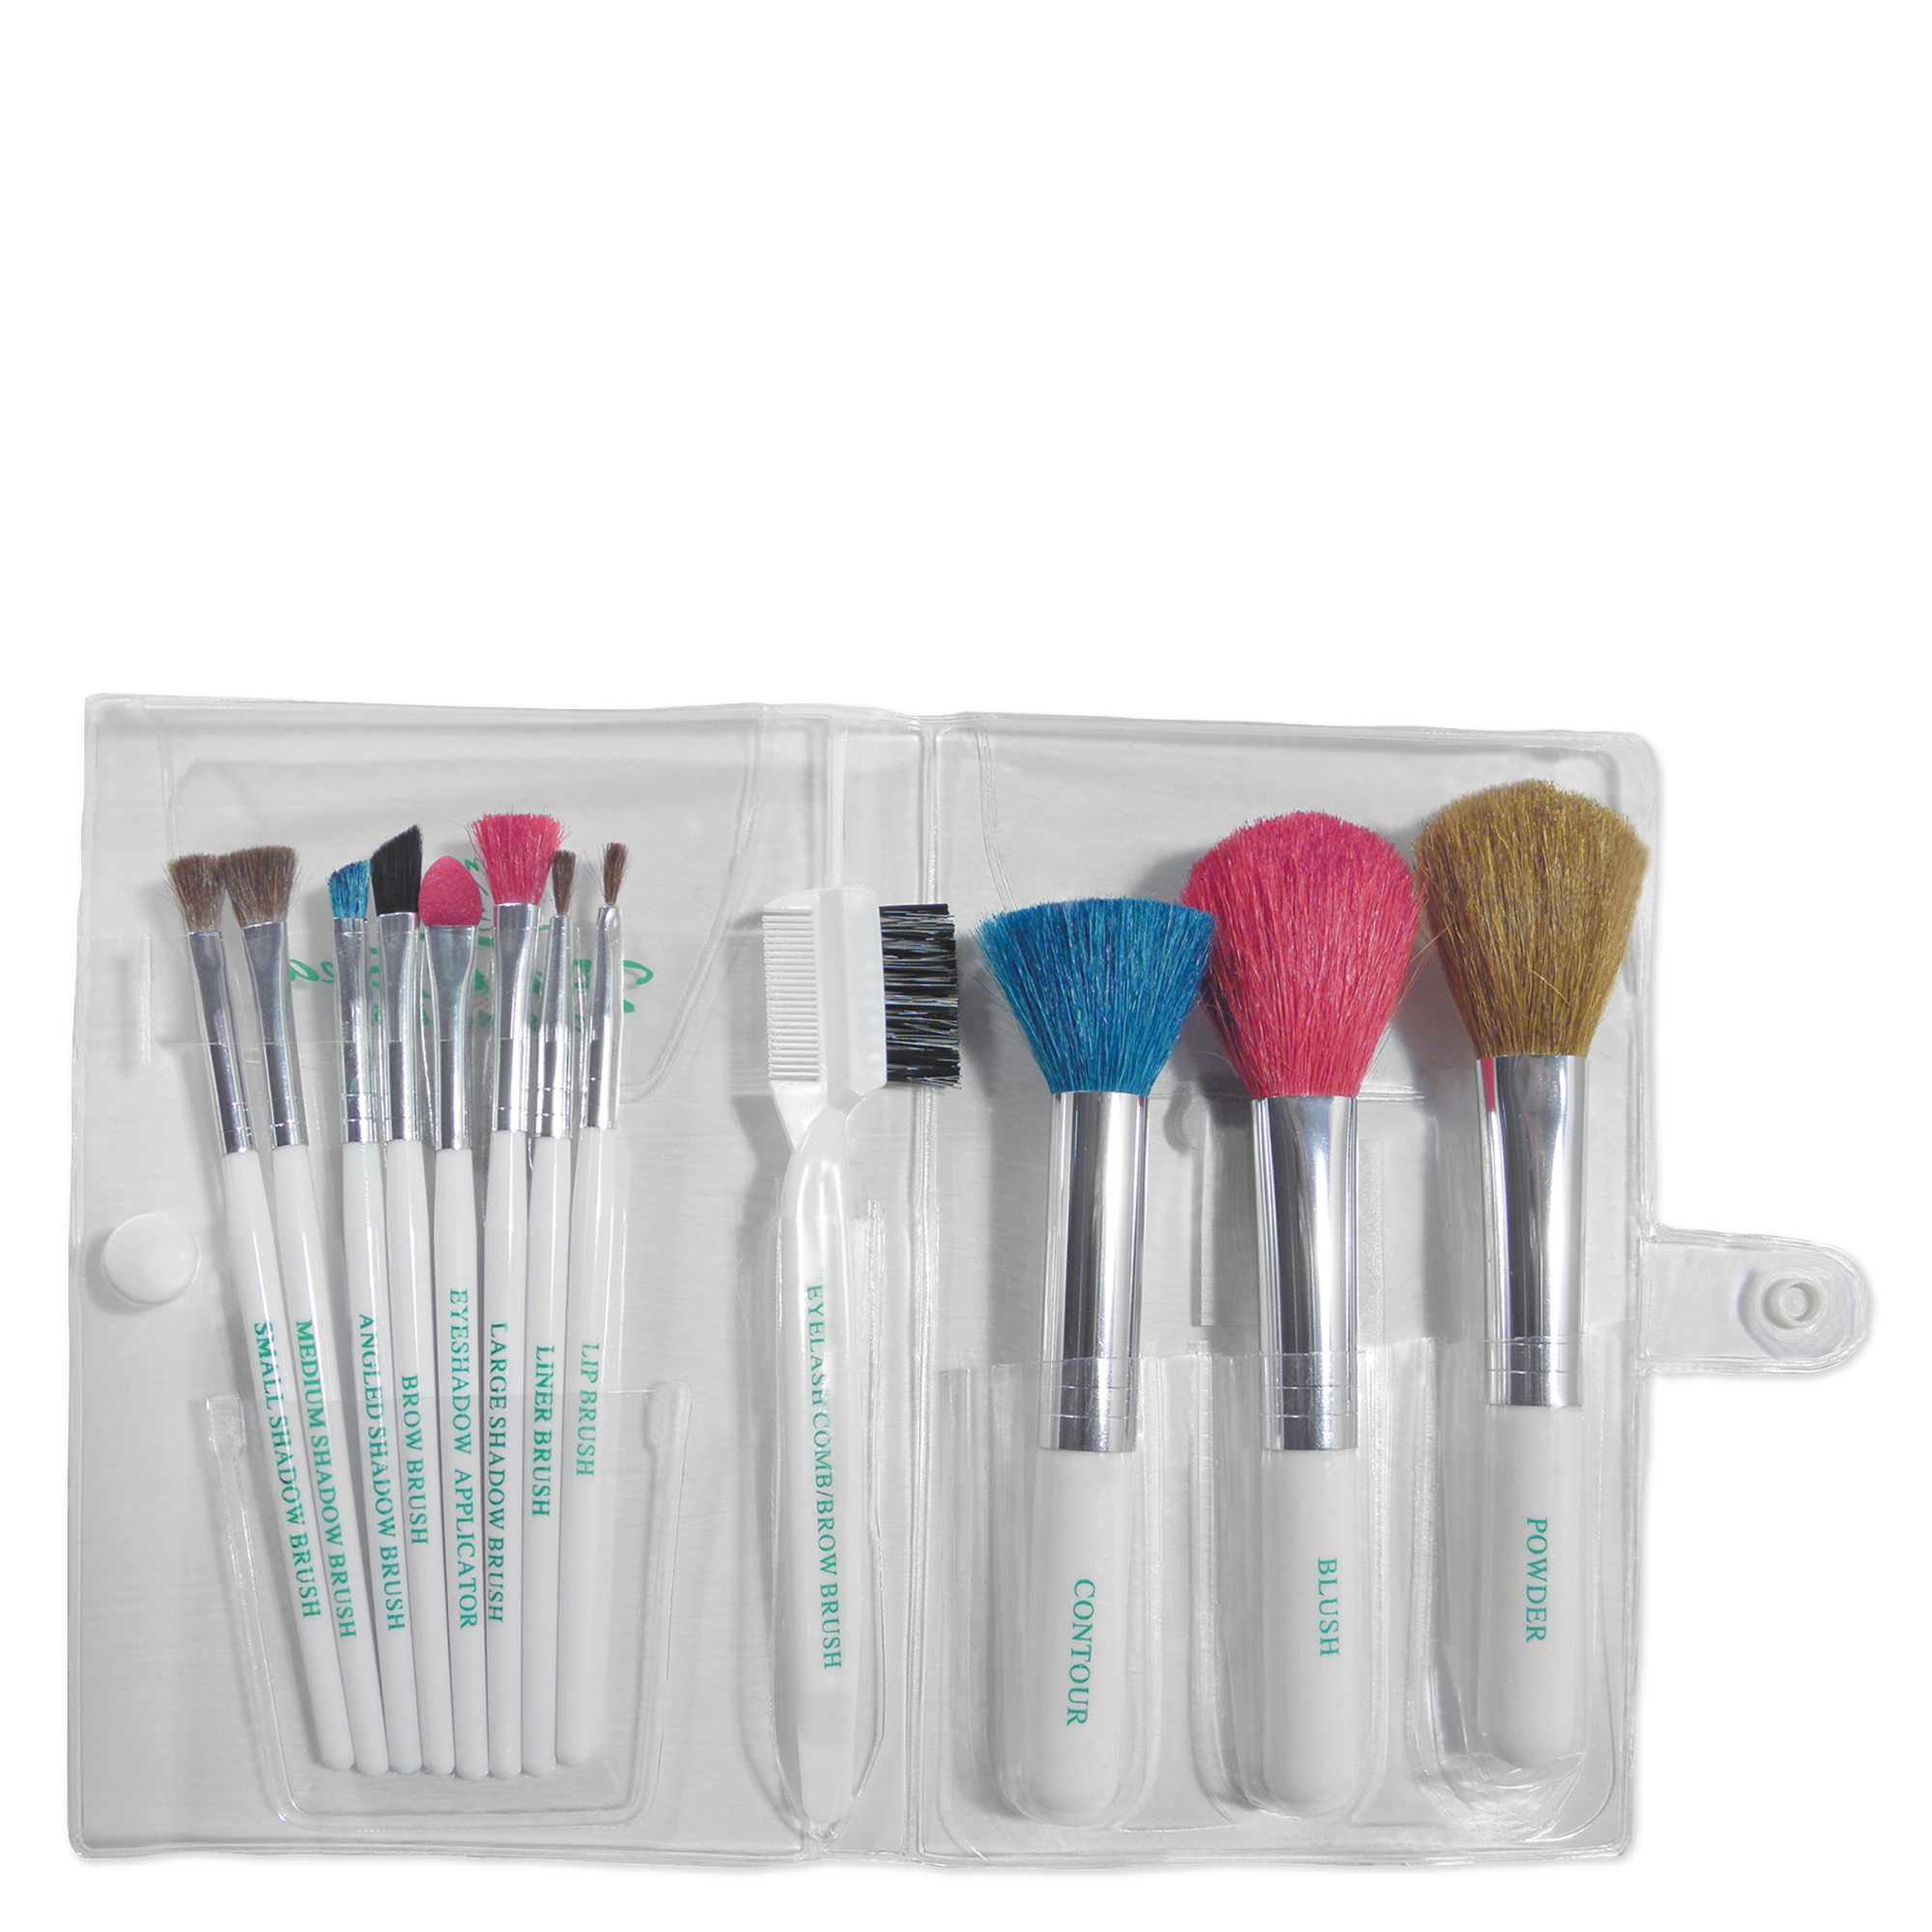 Multicolored Makeup Brush Set with Case - 12 pc.